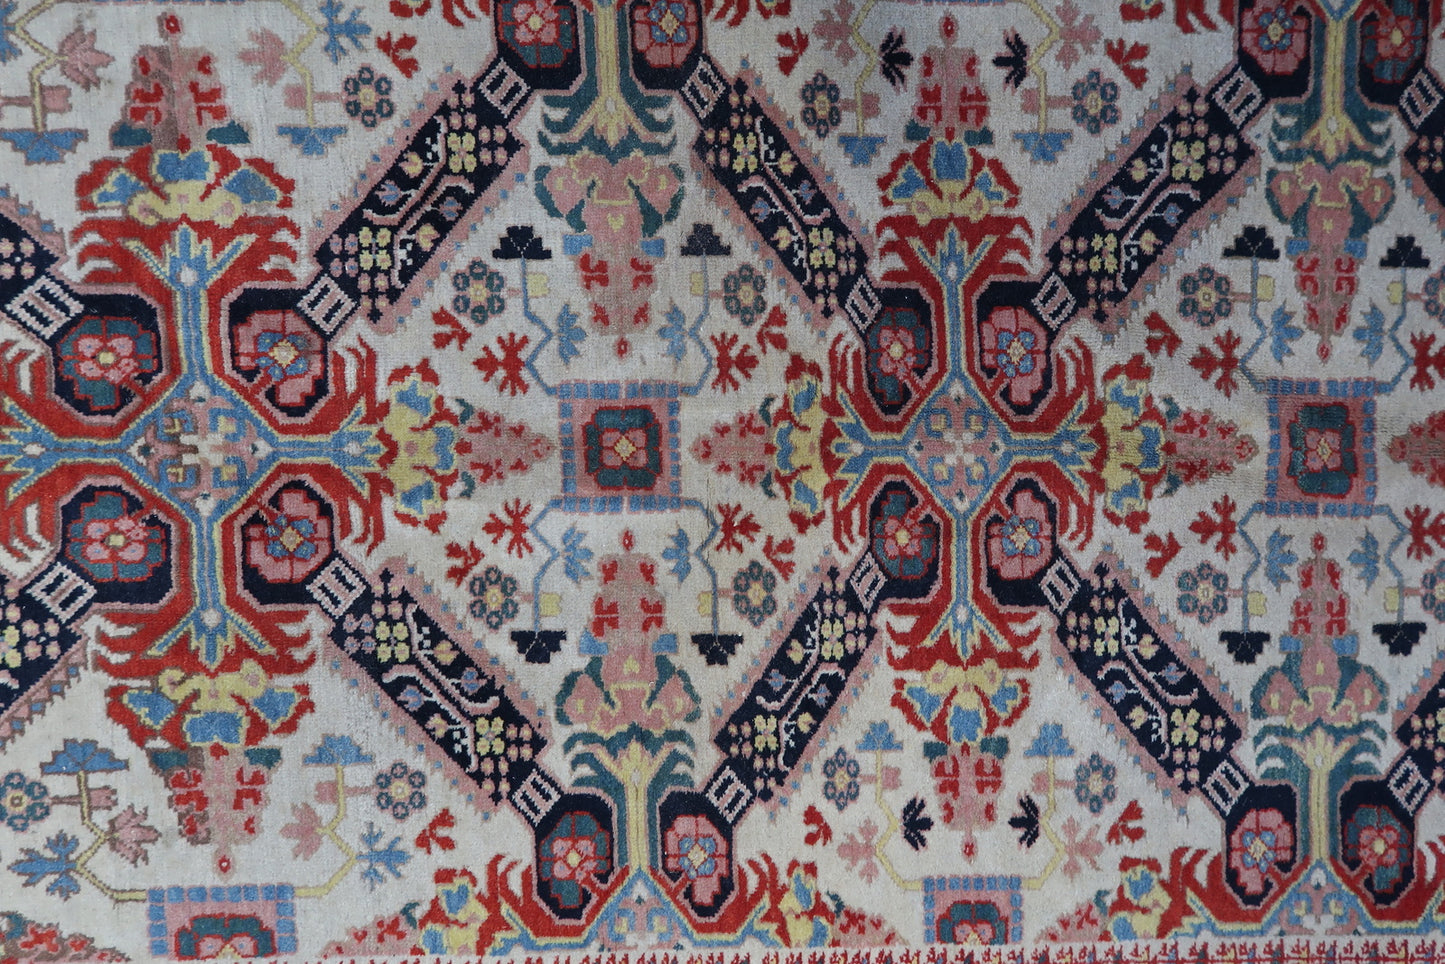 Close-up view showcasing the fine craftsmanship and historical charm of the rug